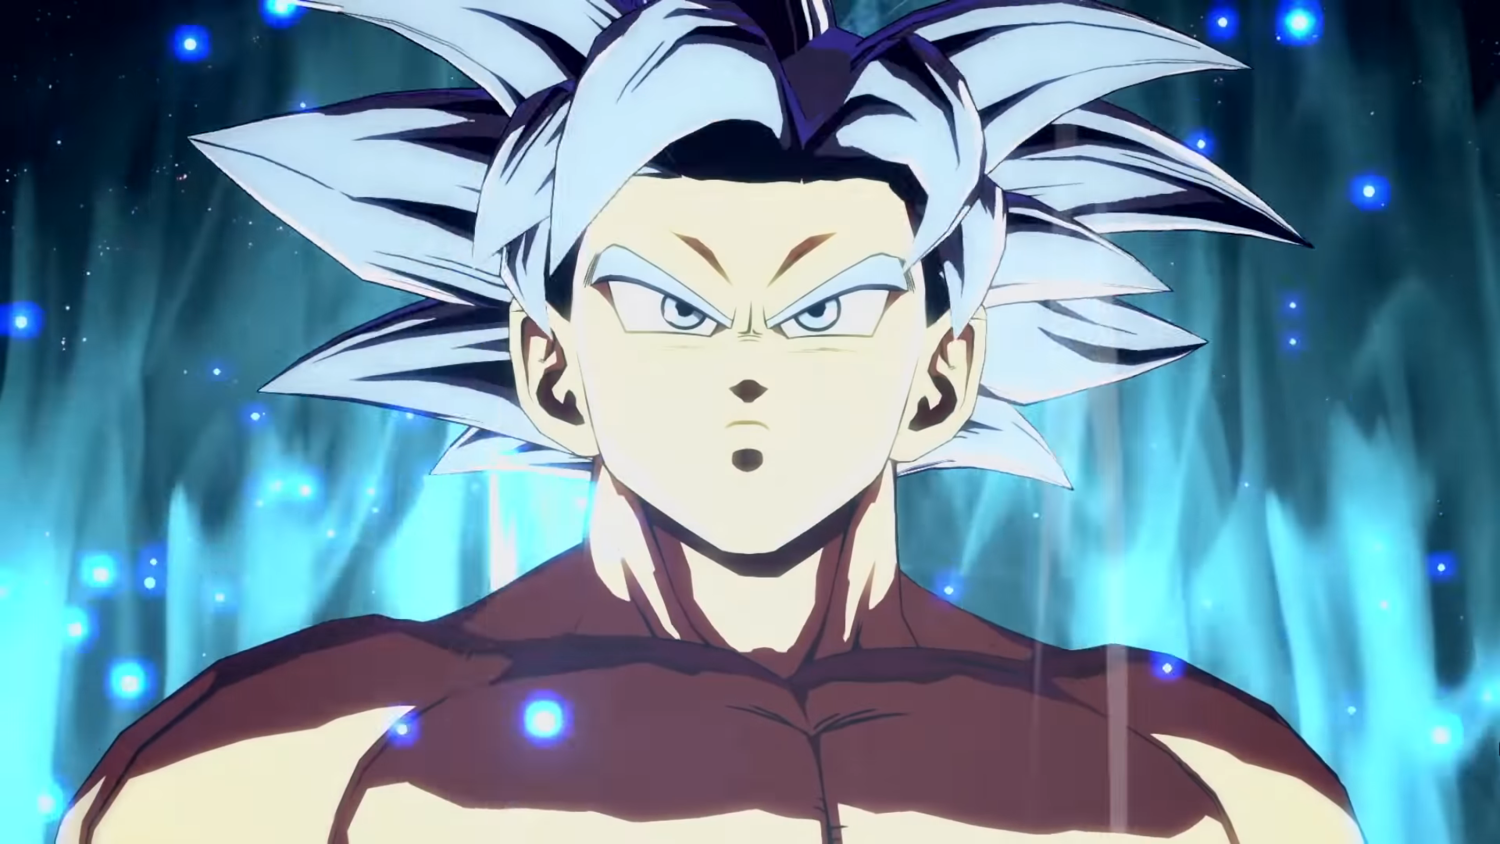 Ultra Instinct Goku is coming to Dragon Ball FighterZ